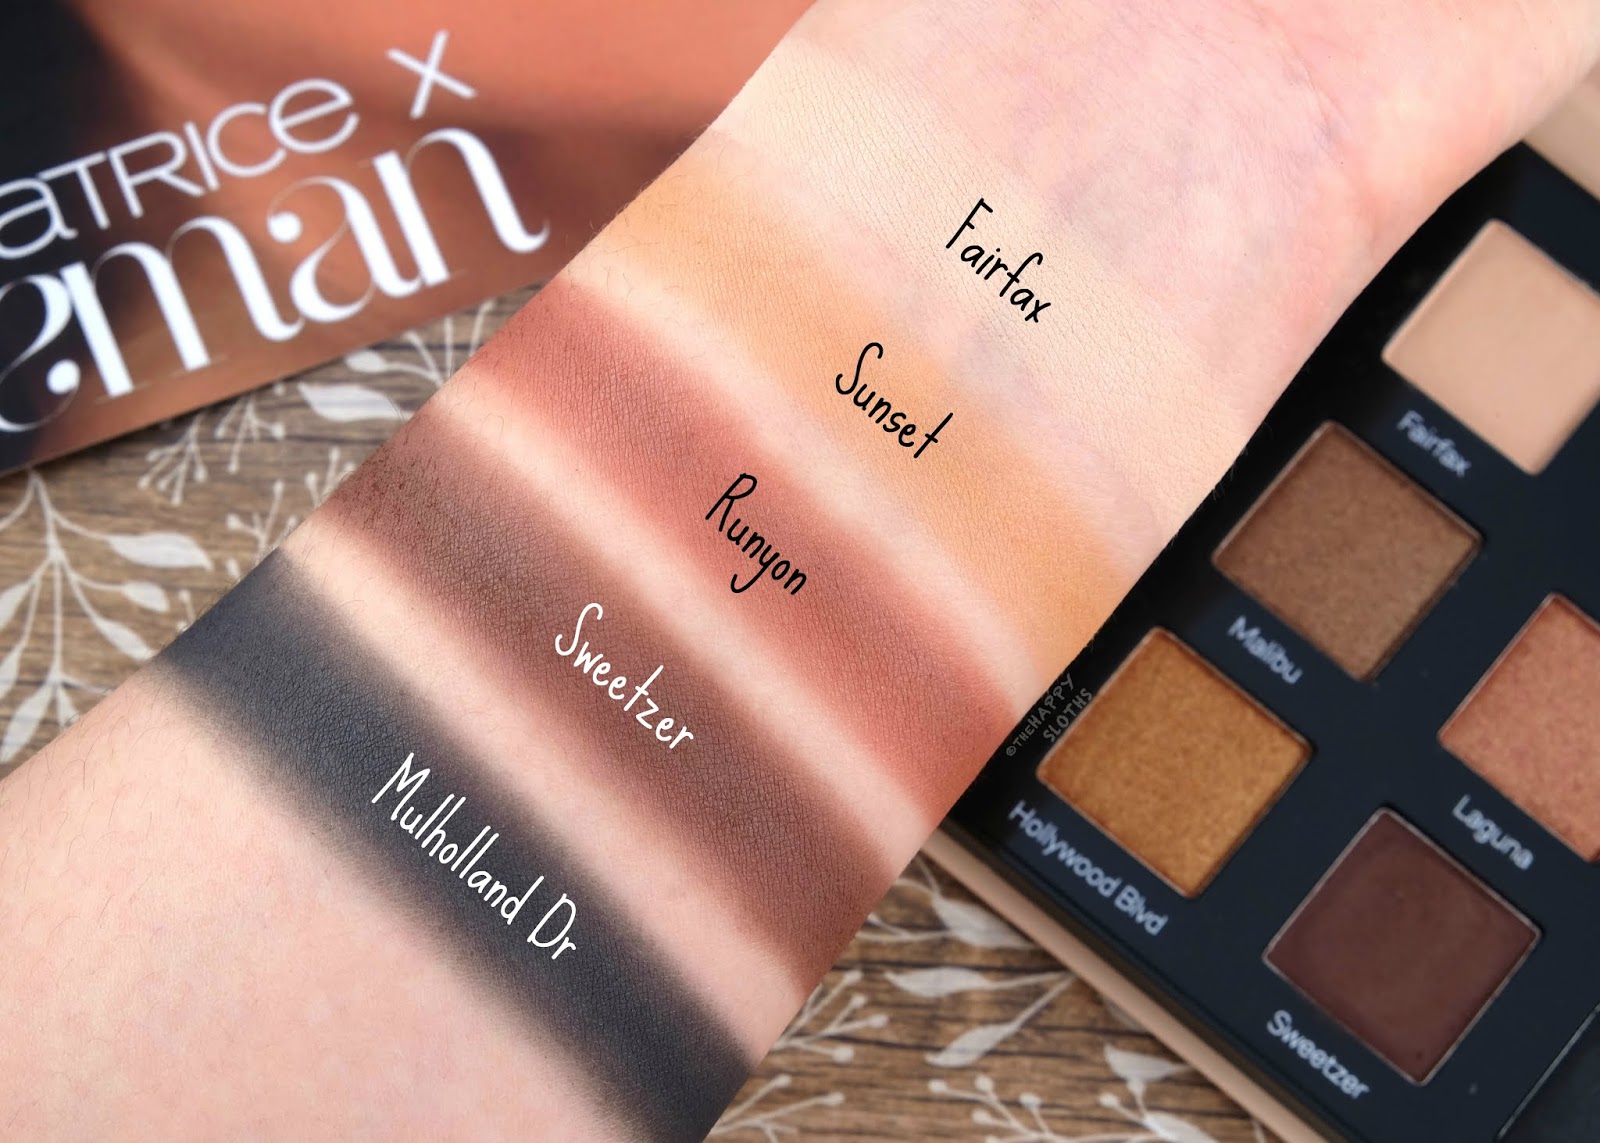 Catrice x Eman | Eyeshadow Palette: Review and Swatches